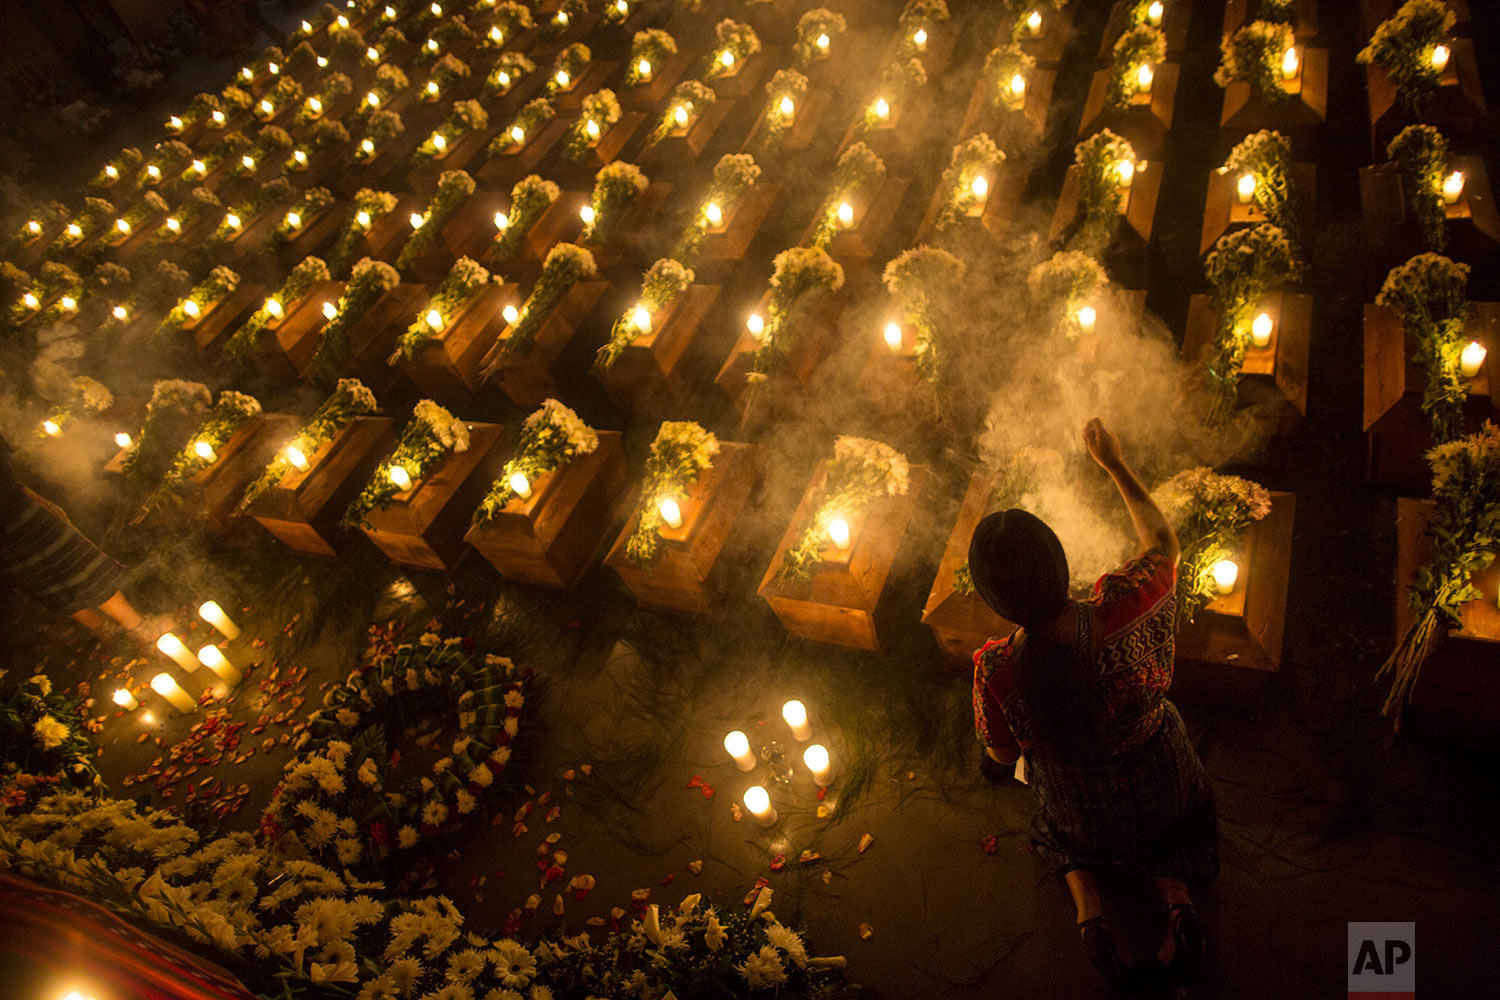  In this June 20, 2018 photo, a woman spreads incense over the coffins holding the remains of 172 unidentified people who were discovered buried at what once was a military camp in San Juan Comalapa, Guatemala, one day before their formal burial at t